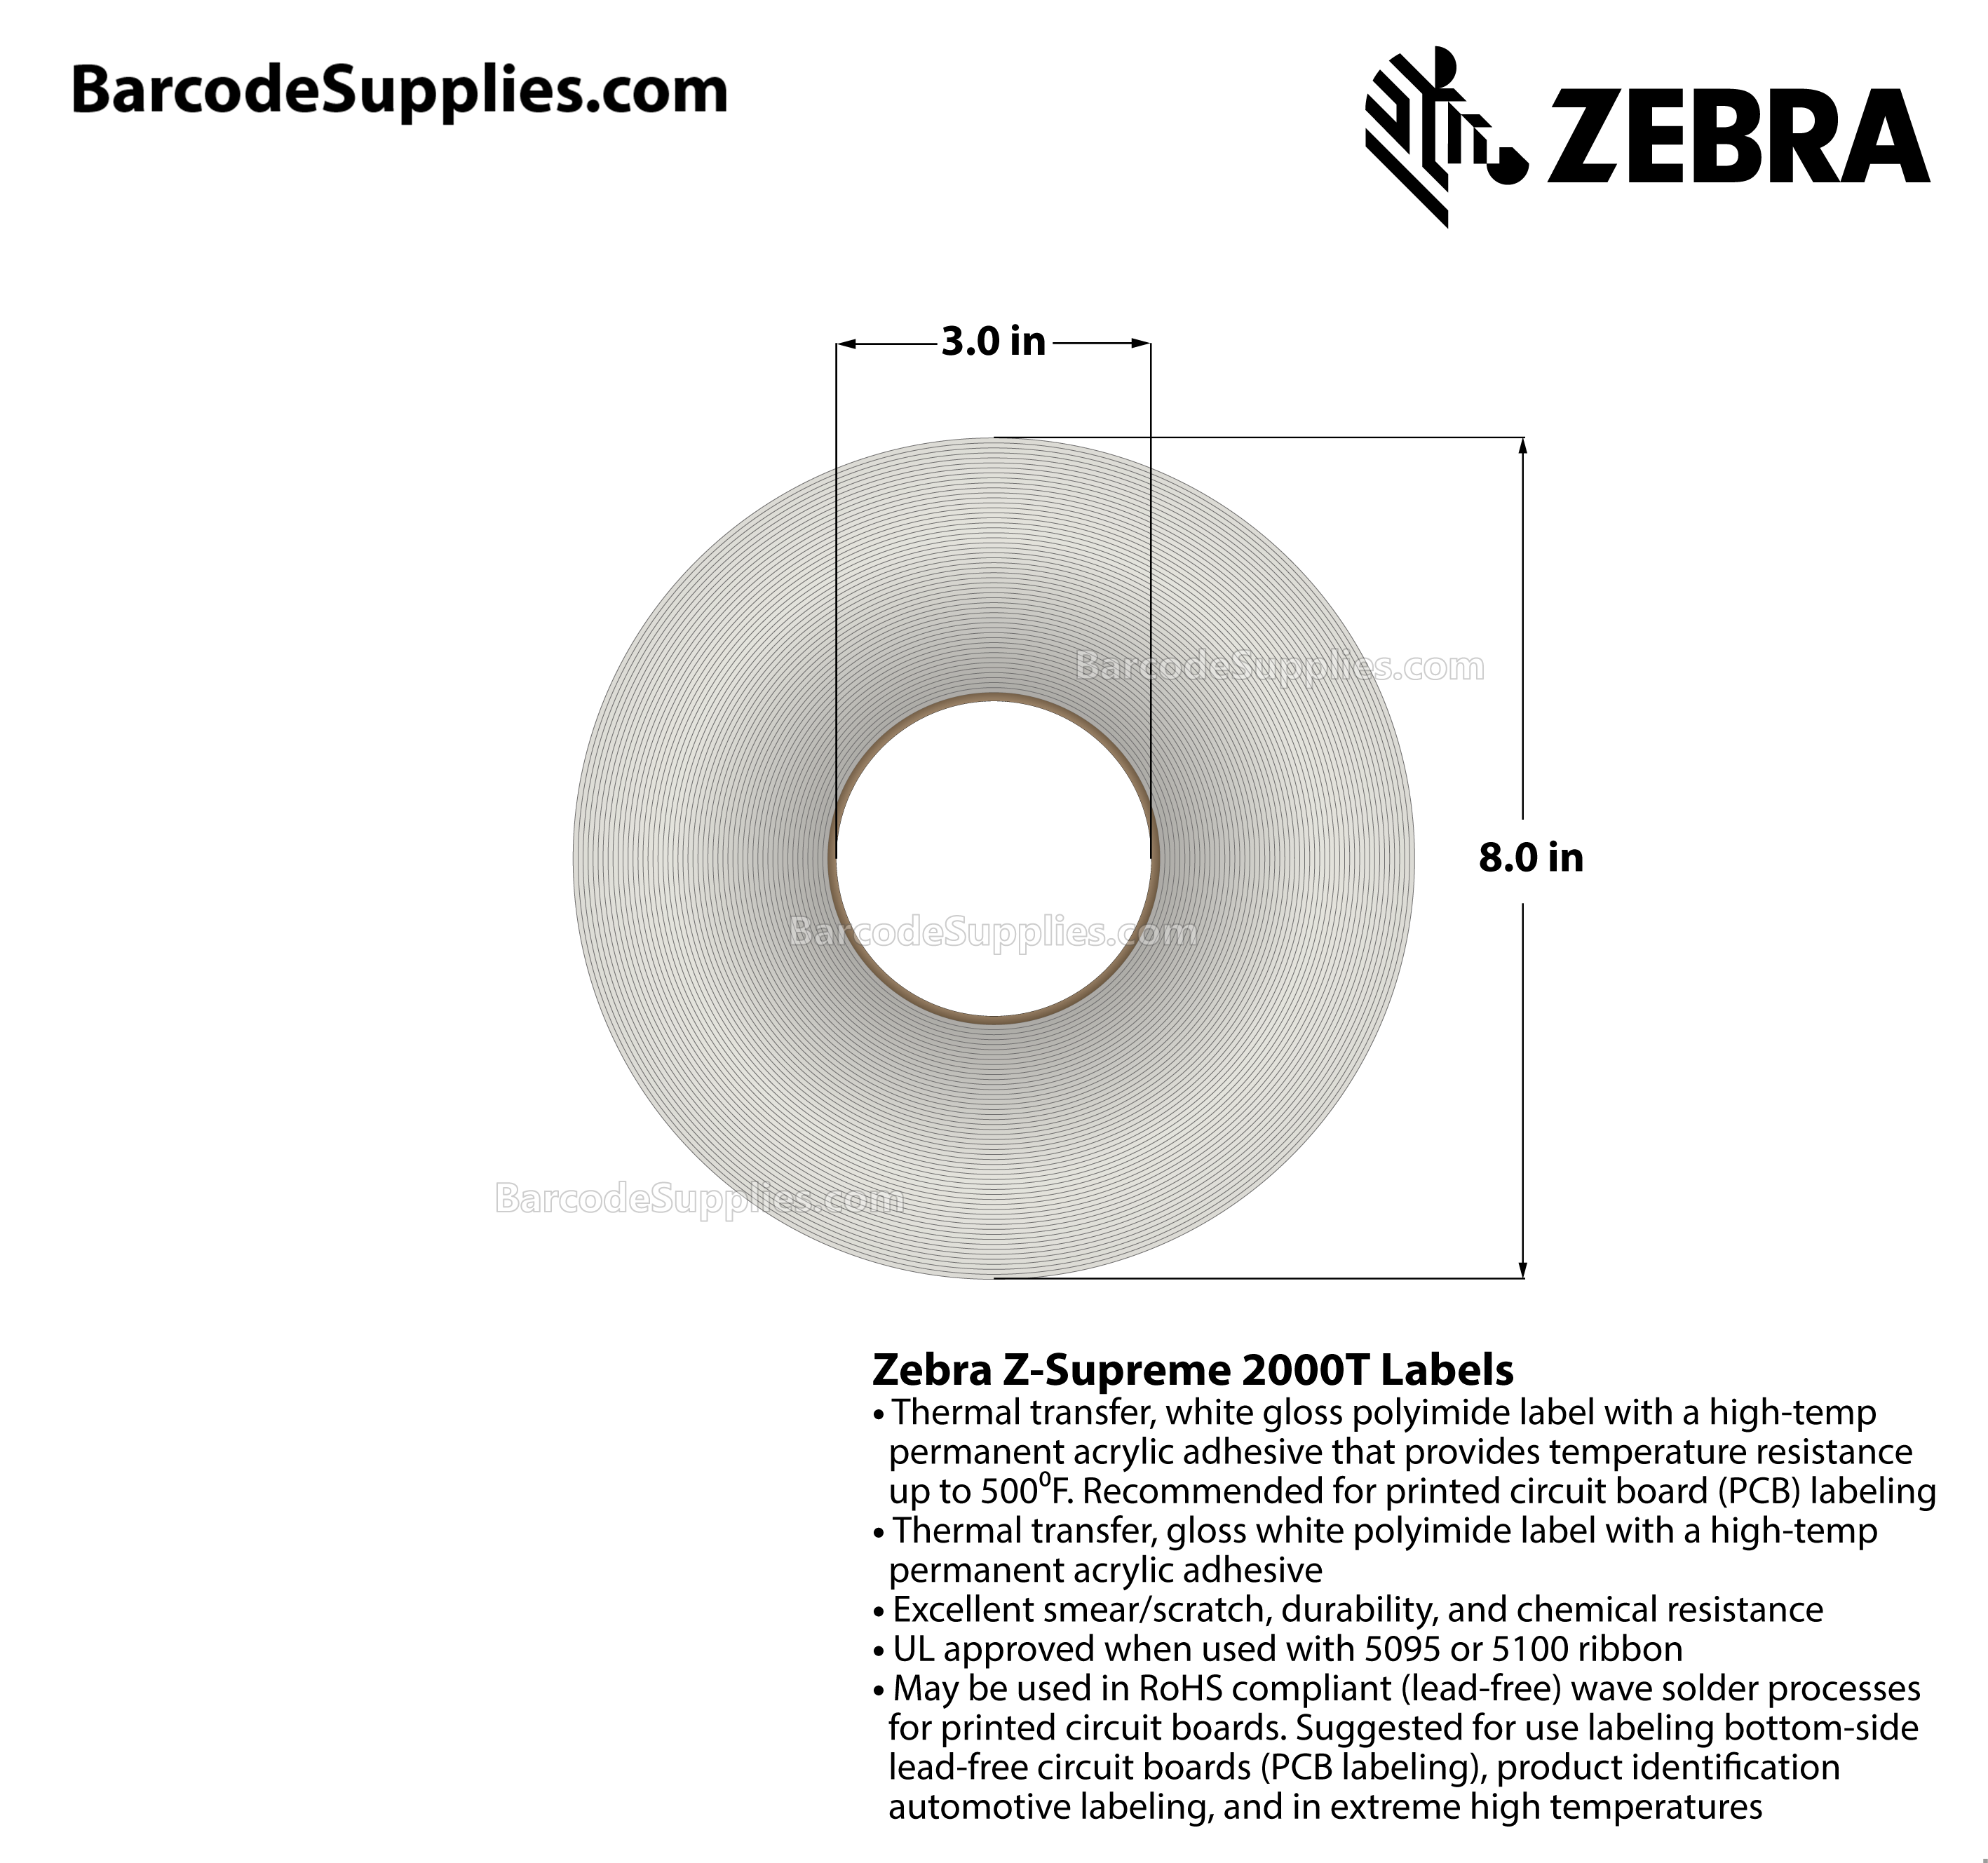 0.9 x 0.25 Thermal Transfer White Z-Supreme 2000T (3-Across) Labels With High-temp Adhesive - Perforated - 10002 Labels Per Roll - Carton Of 1 Rolls - 10002 Labels Total - MPN: 10023196